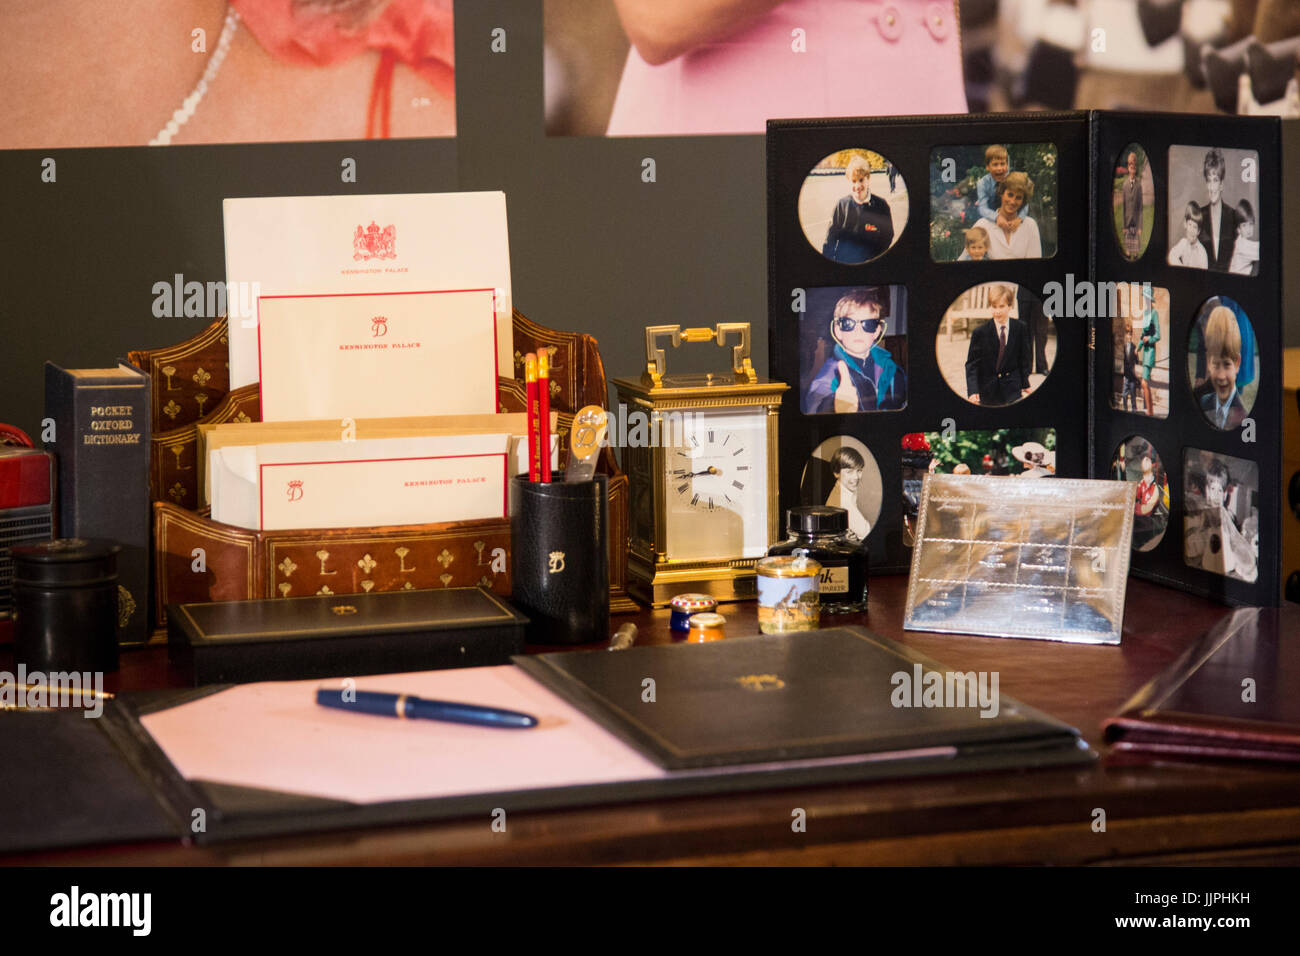 *** EMBARGOED to 00:01 BST, FRIDAY, 21 JULY 2017 *** Pictured: To mark the 20th anniversary of the death of Diana, Princess of Wales, a desk is displayed at which The Princess worked inn her sitting room at Kensington Palace. Many of the objects have been selected by the Duke of Cambridge and Prince Harry. This summer, visitors to the State Rooms at Buckingham Palace will enjoy a special display of more than 200 gifts presented to Her Majesty The Queen throughout her 65-year reign and a special tribute to Diana, Princess of Wales. The State Rooms are open to the public from 22 July to 1 Octob Stock Photo